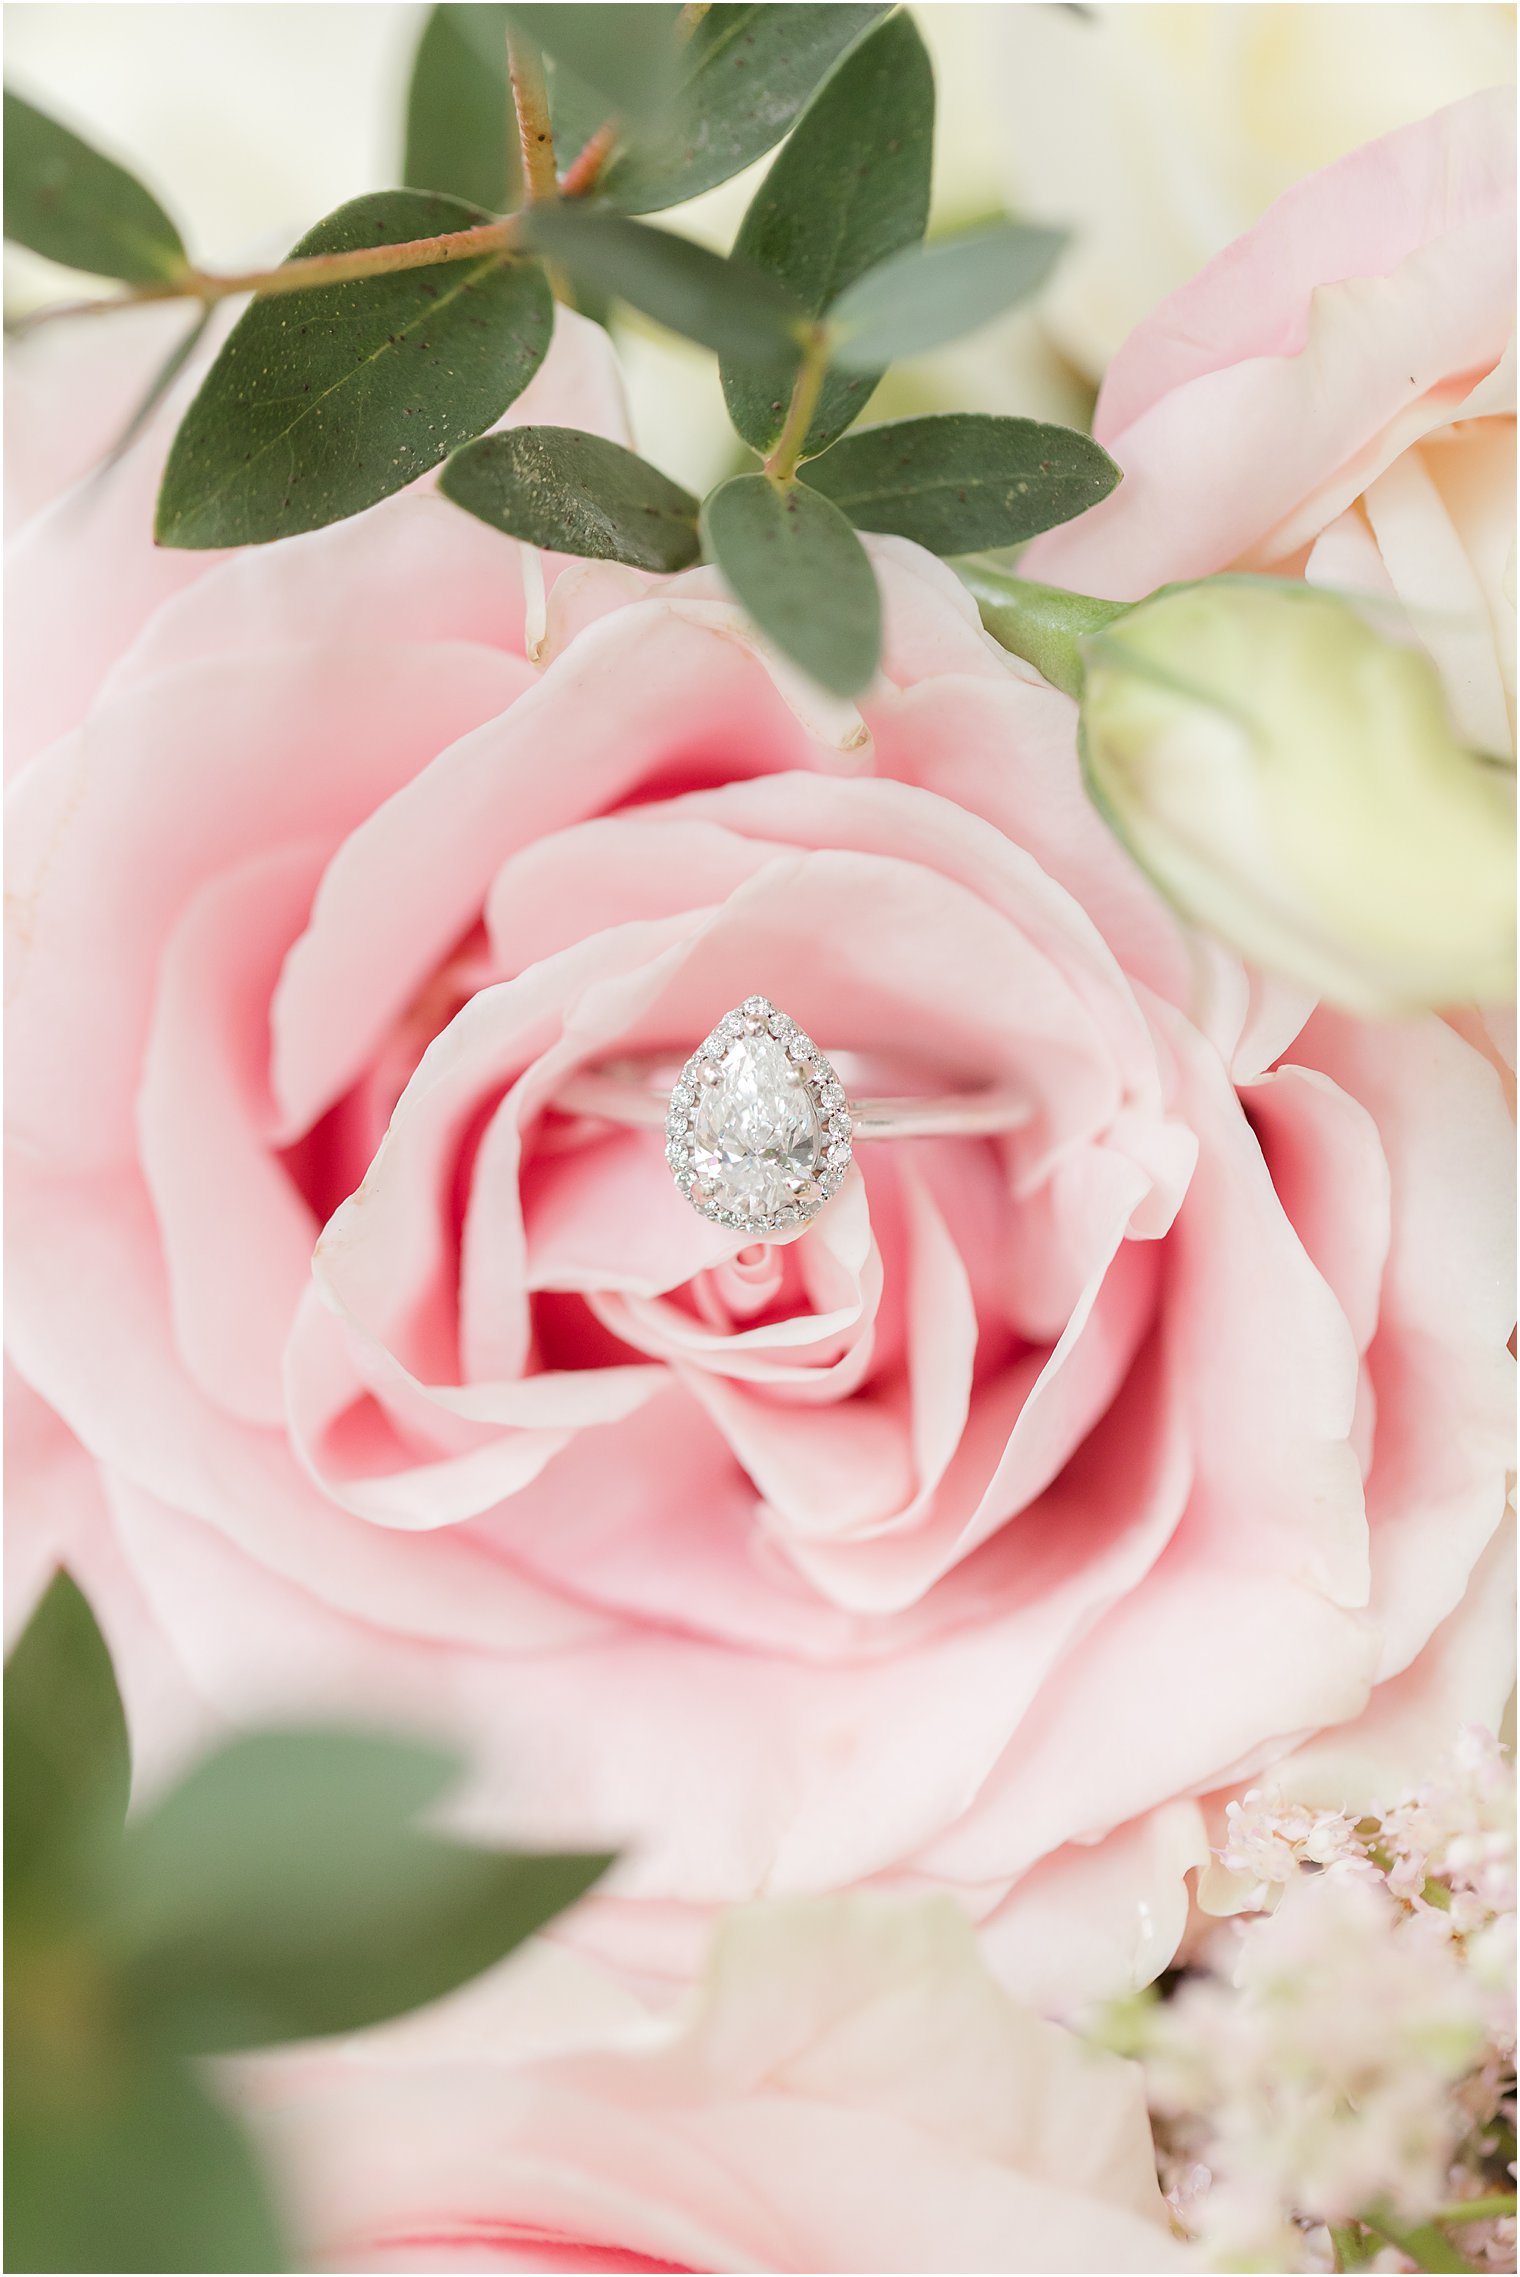 diamond ring rests in pink rose